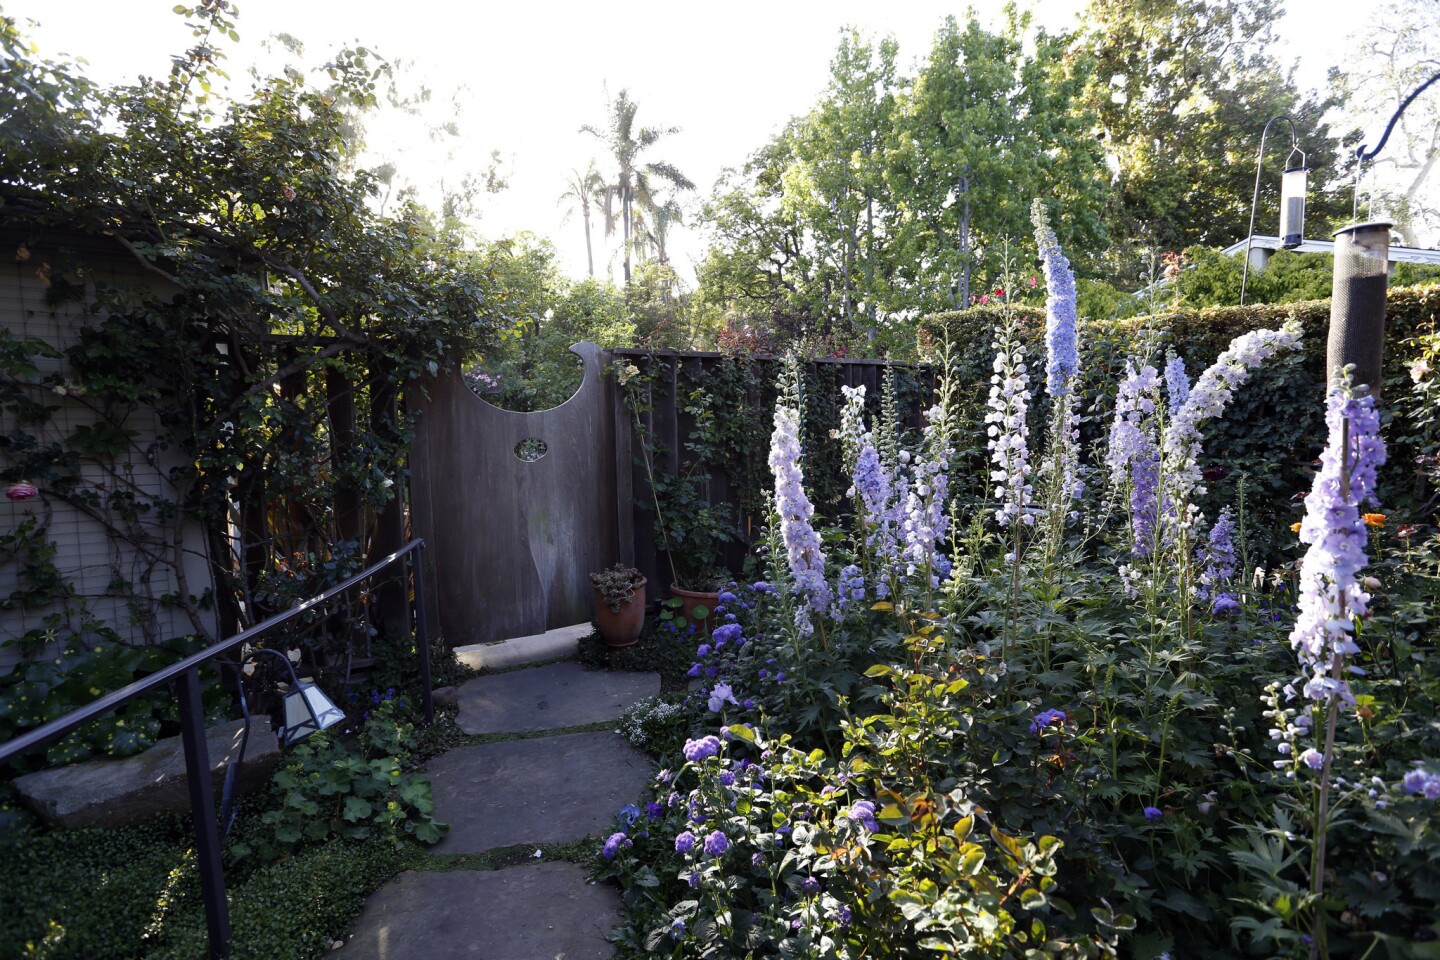 The view from Newmar's front porch includes a bed of Pacific Giant hybrid 'Camelliard' delphiniums and Everest ageratum. She designed the wooden garden gate with its peekaboo hole. To the left, a climbing Eden rose camouflages the garage.